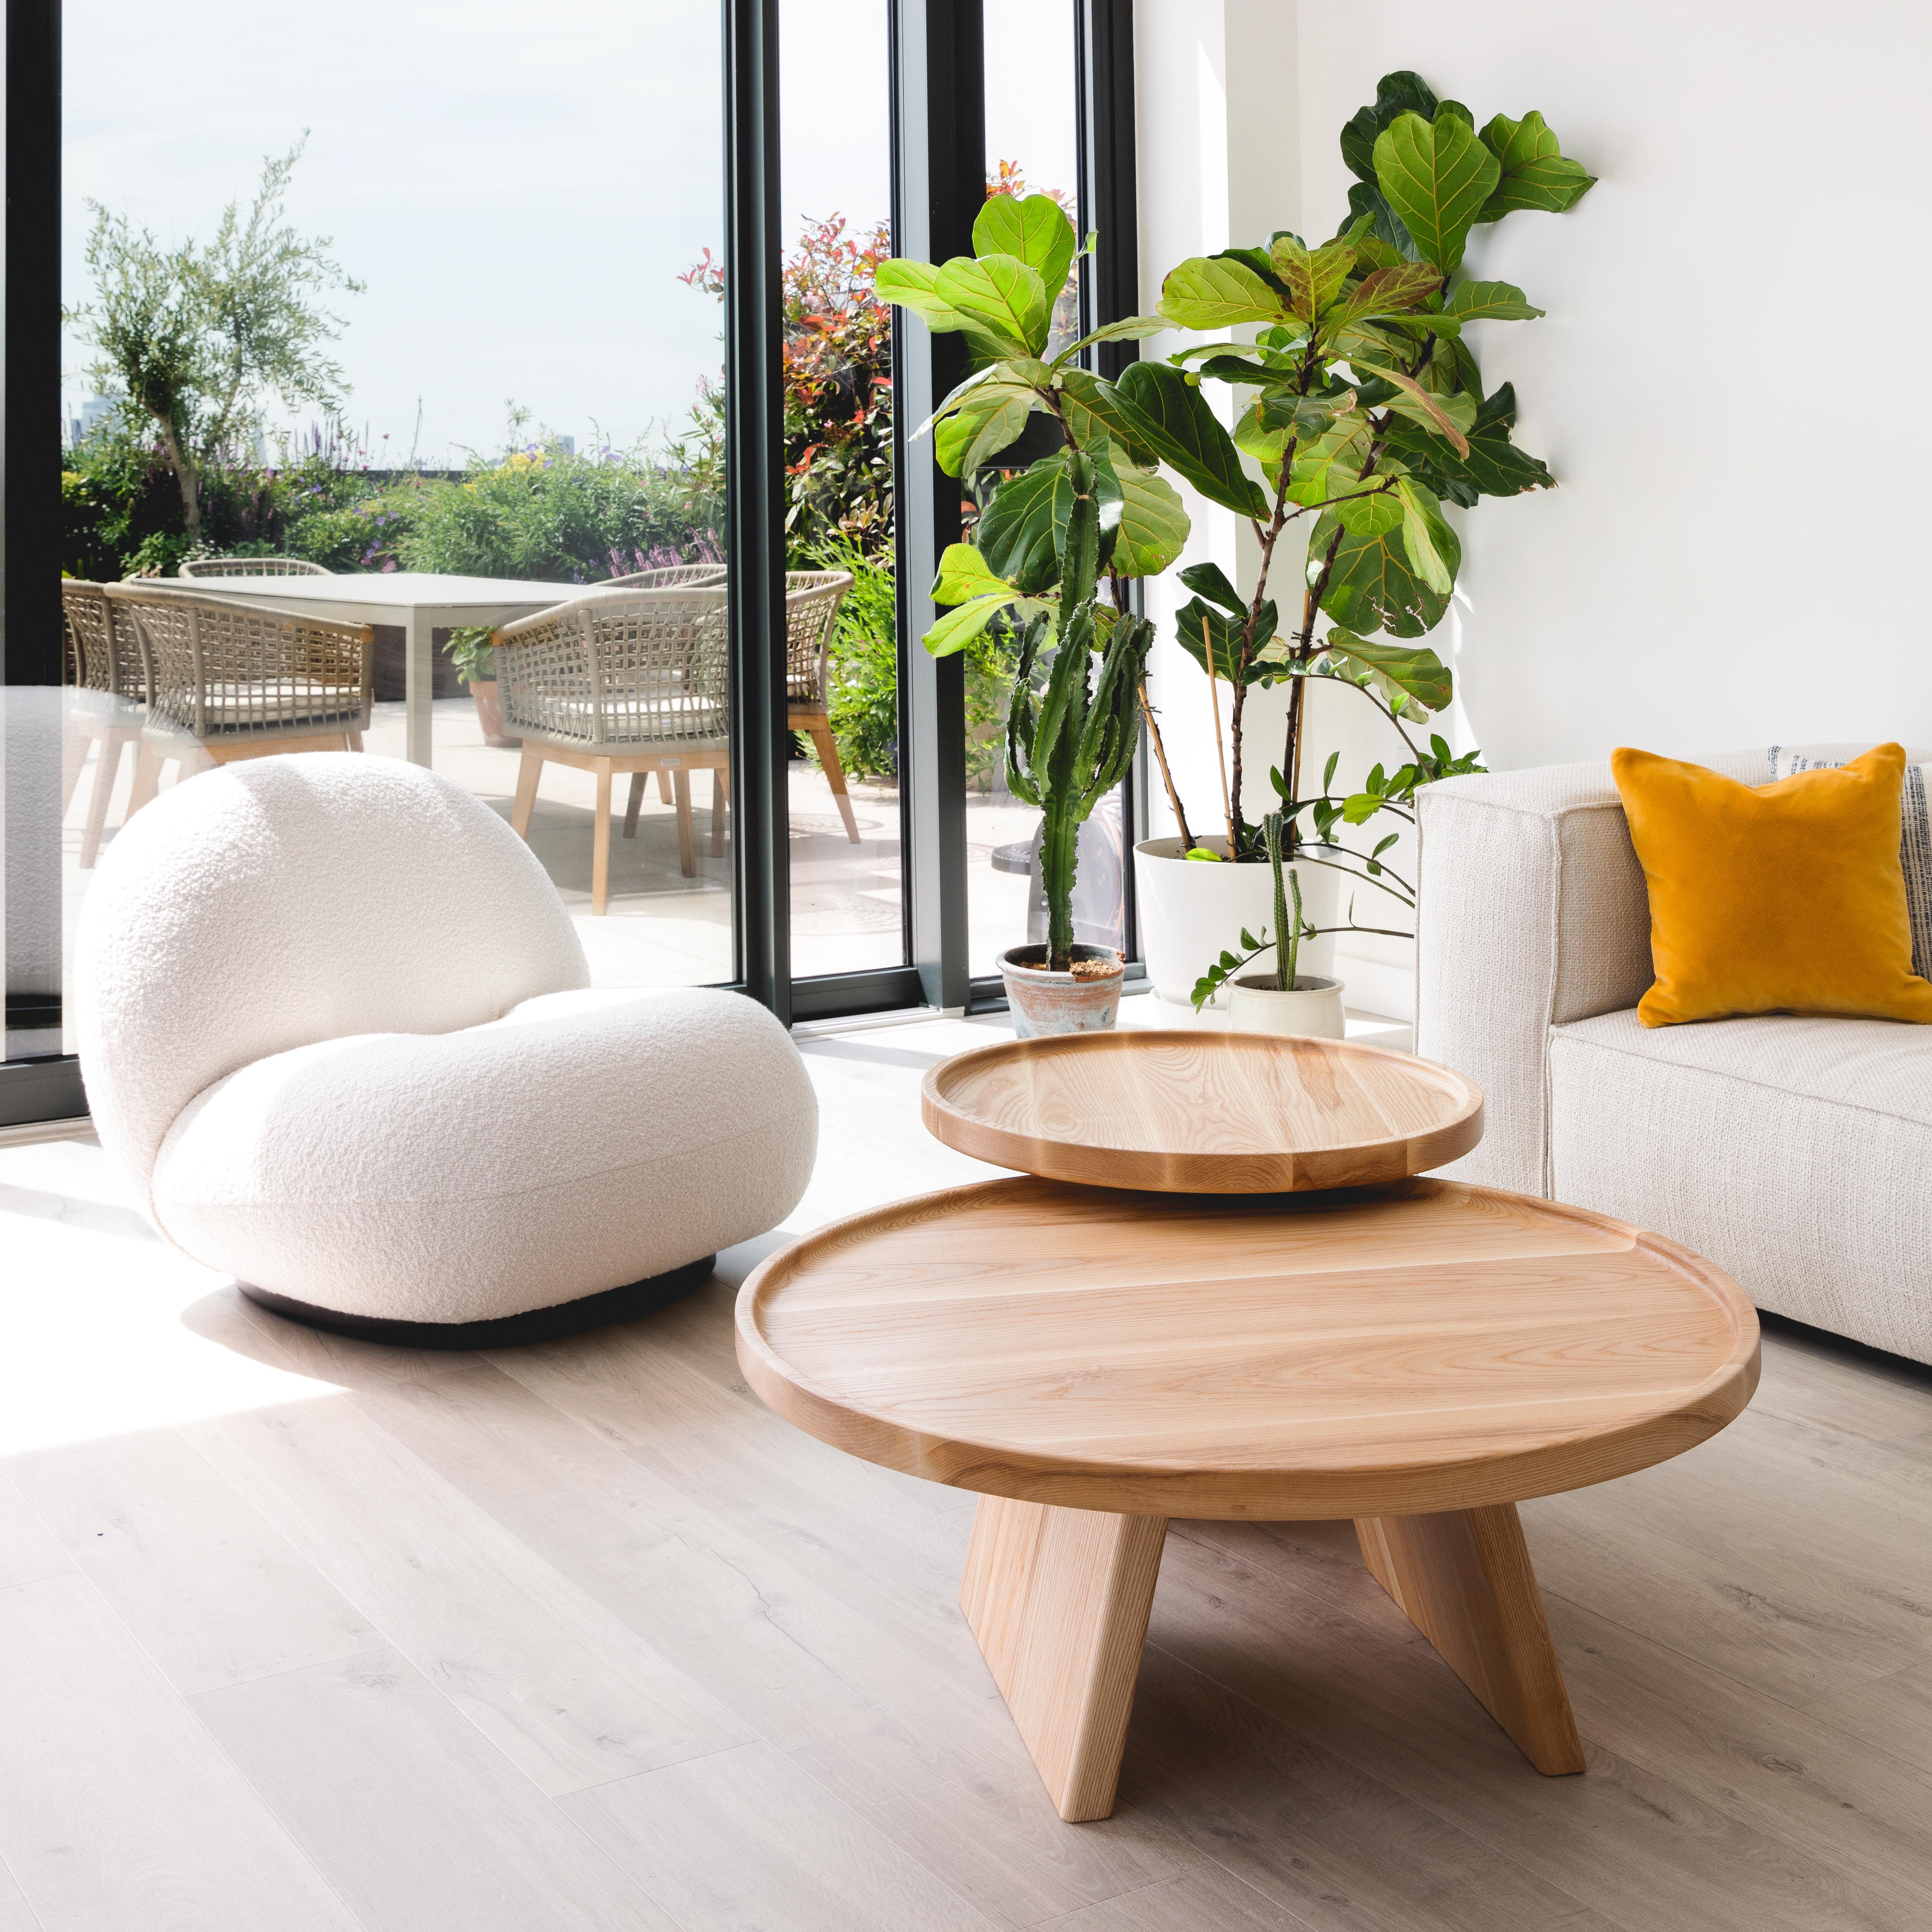 This contemporary coffee table pair celebrates elevated simplicity.

The tables are designed to interact with one another, seamlessly nested together in a delightful two-tiered pair, or used as separate pieces, bringing spontaneity to your living